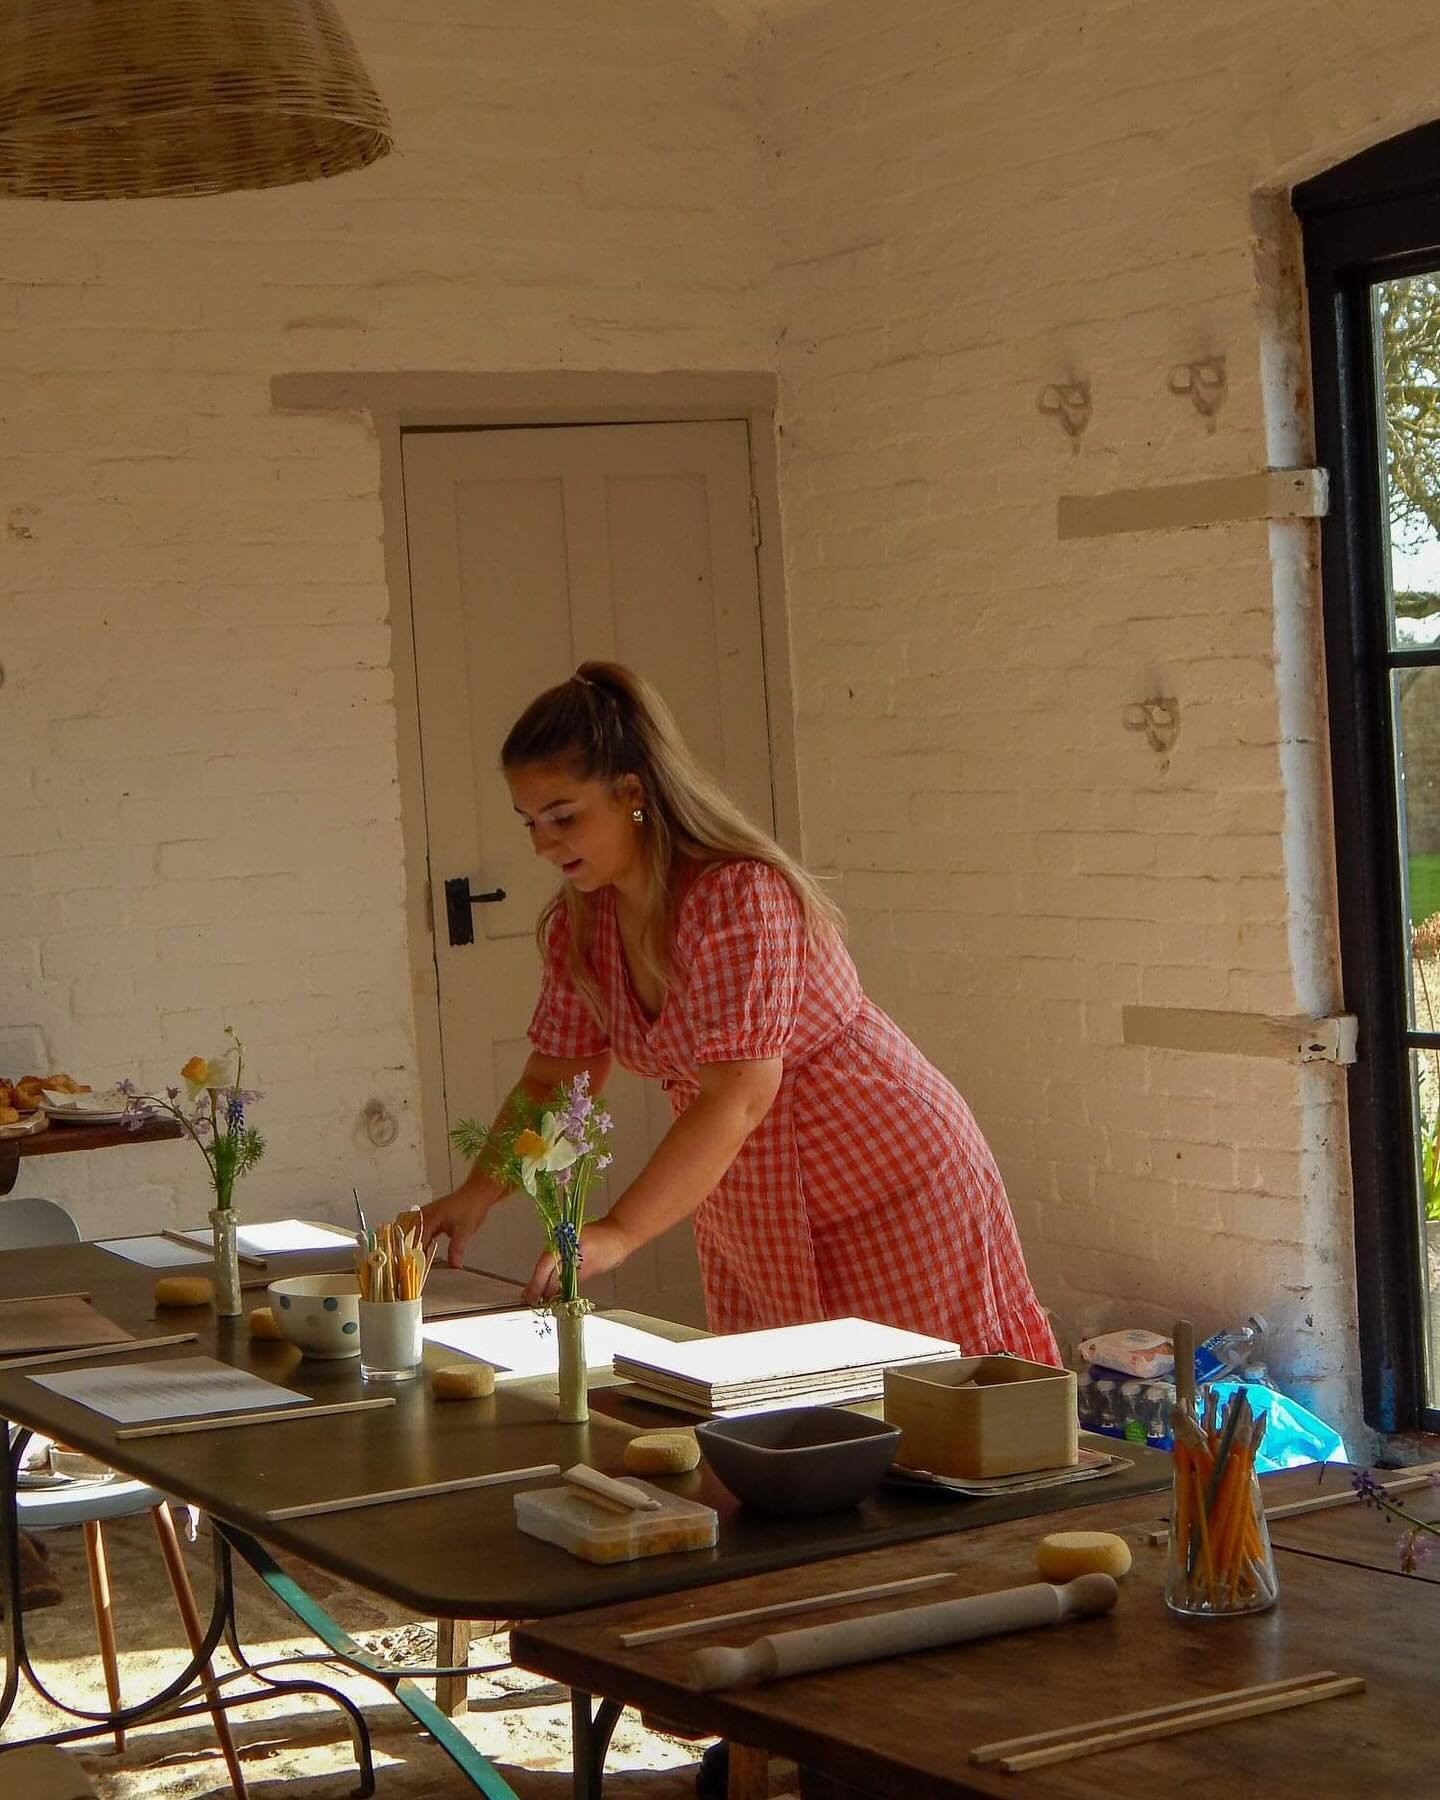 We still aren&rsquo;t over our Creative Retreat we hosted last Sunday at the beautiful Kirby Farm Barn, we started the day with breakfast pastries and fruit, following on with Pottery by making our own Spring Vases. The guests were shown hand-buildin